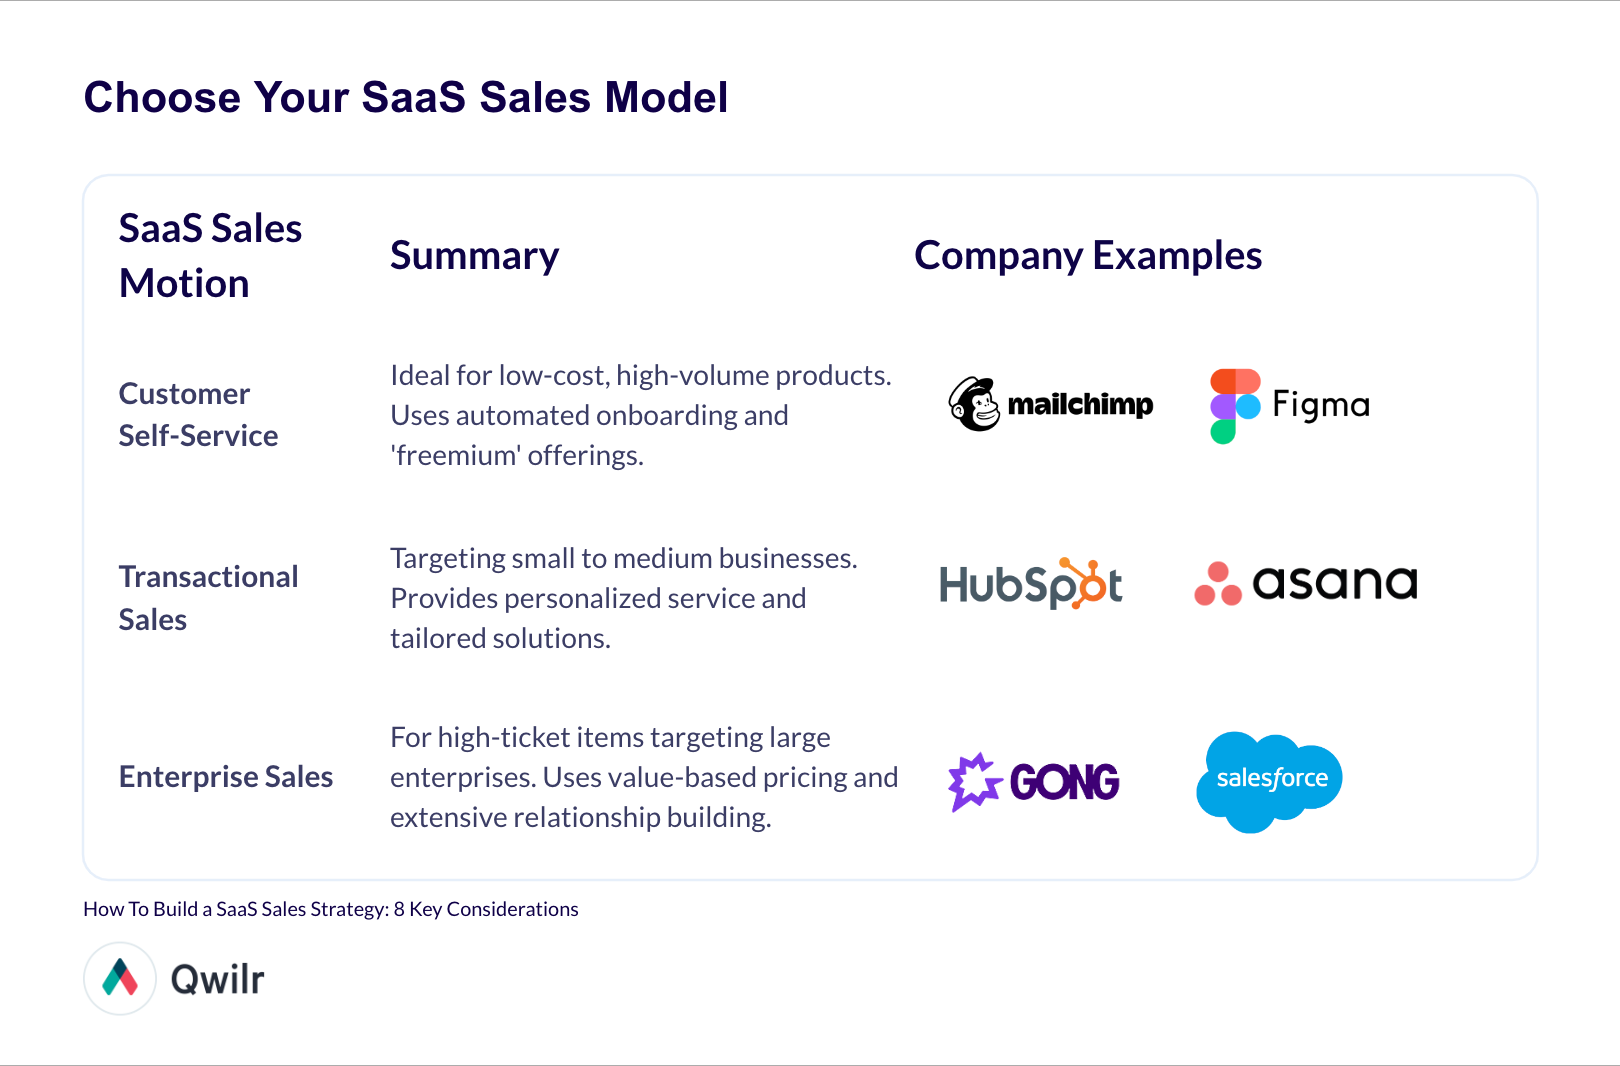 How Do You Assemble a Top Tier SaaS Marketing Strategy?